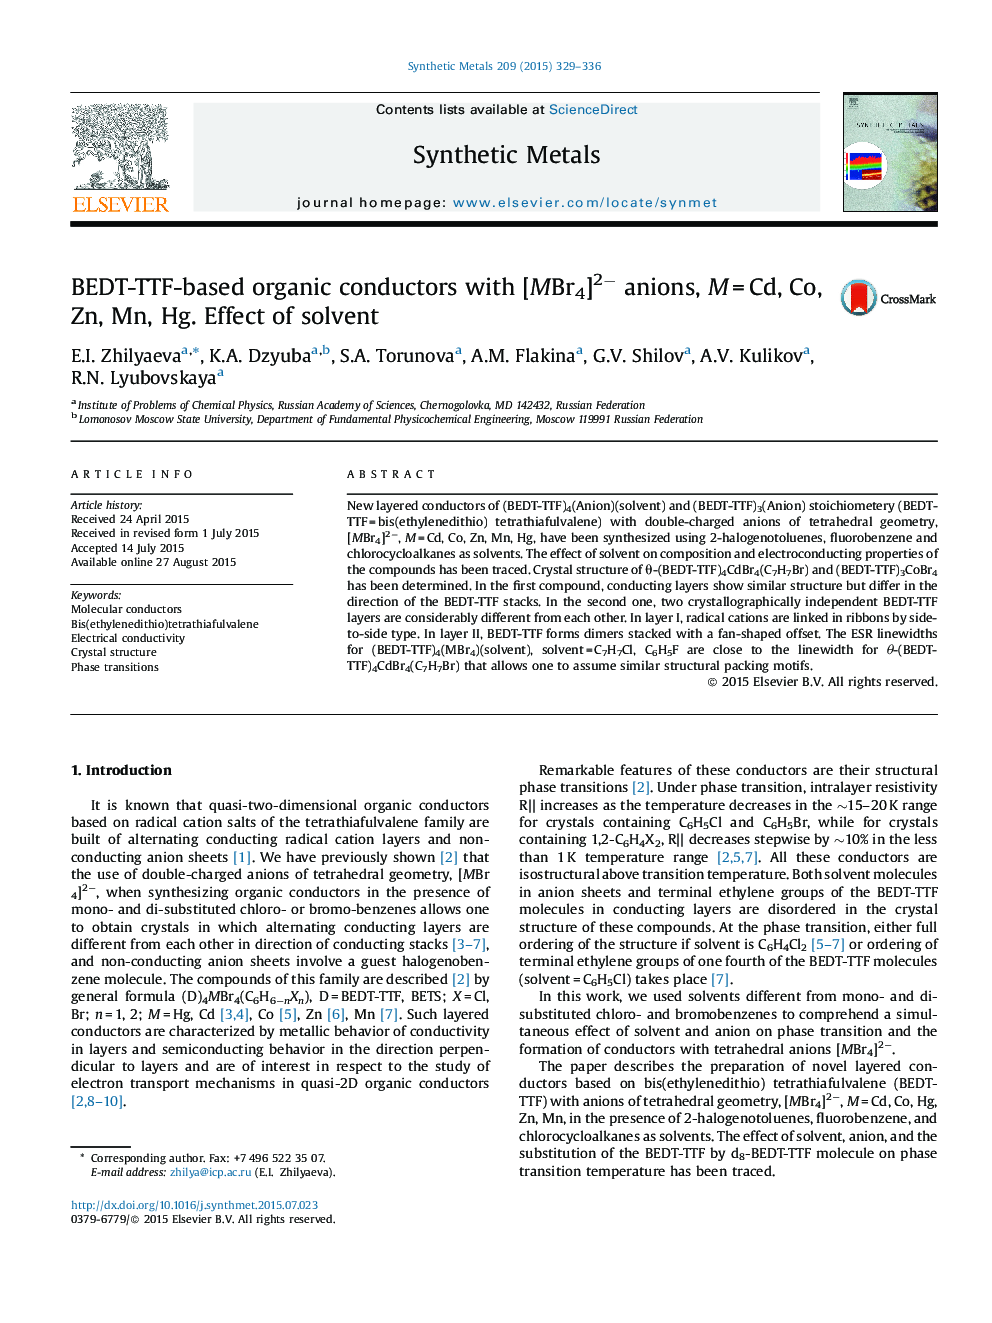 BEDT-TTF-based organic conductors with [MBr4]2− anions, M = Cd, Co, Zn, Mn, Hg. Effect of solvent